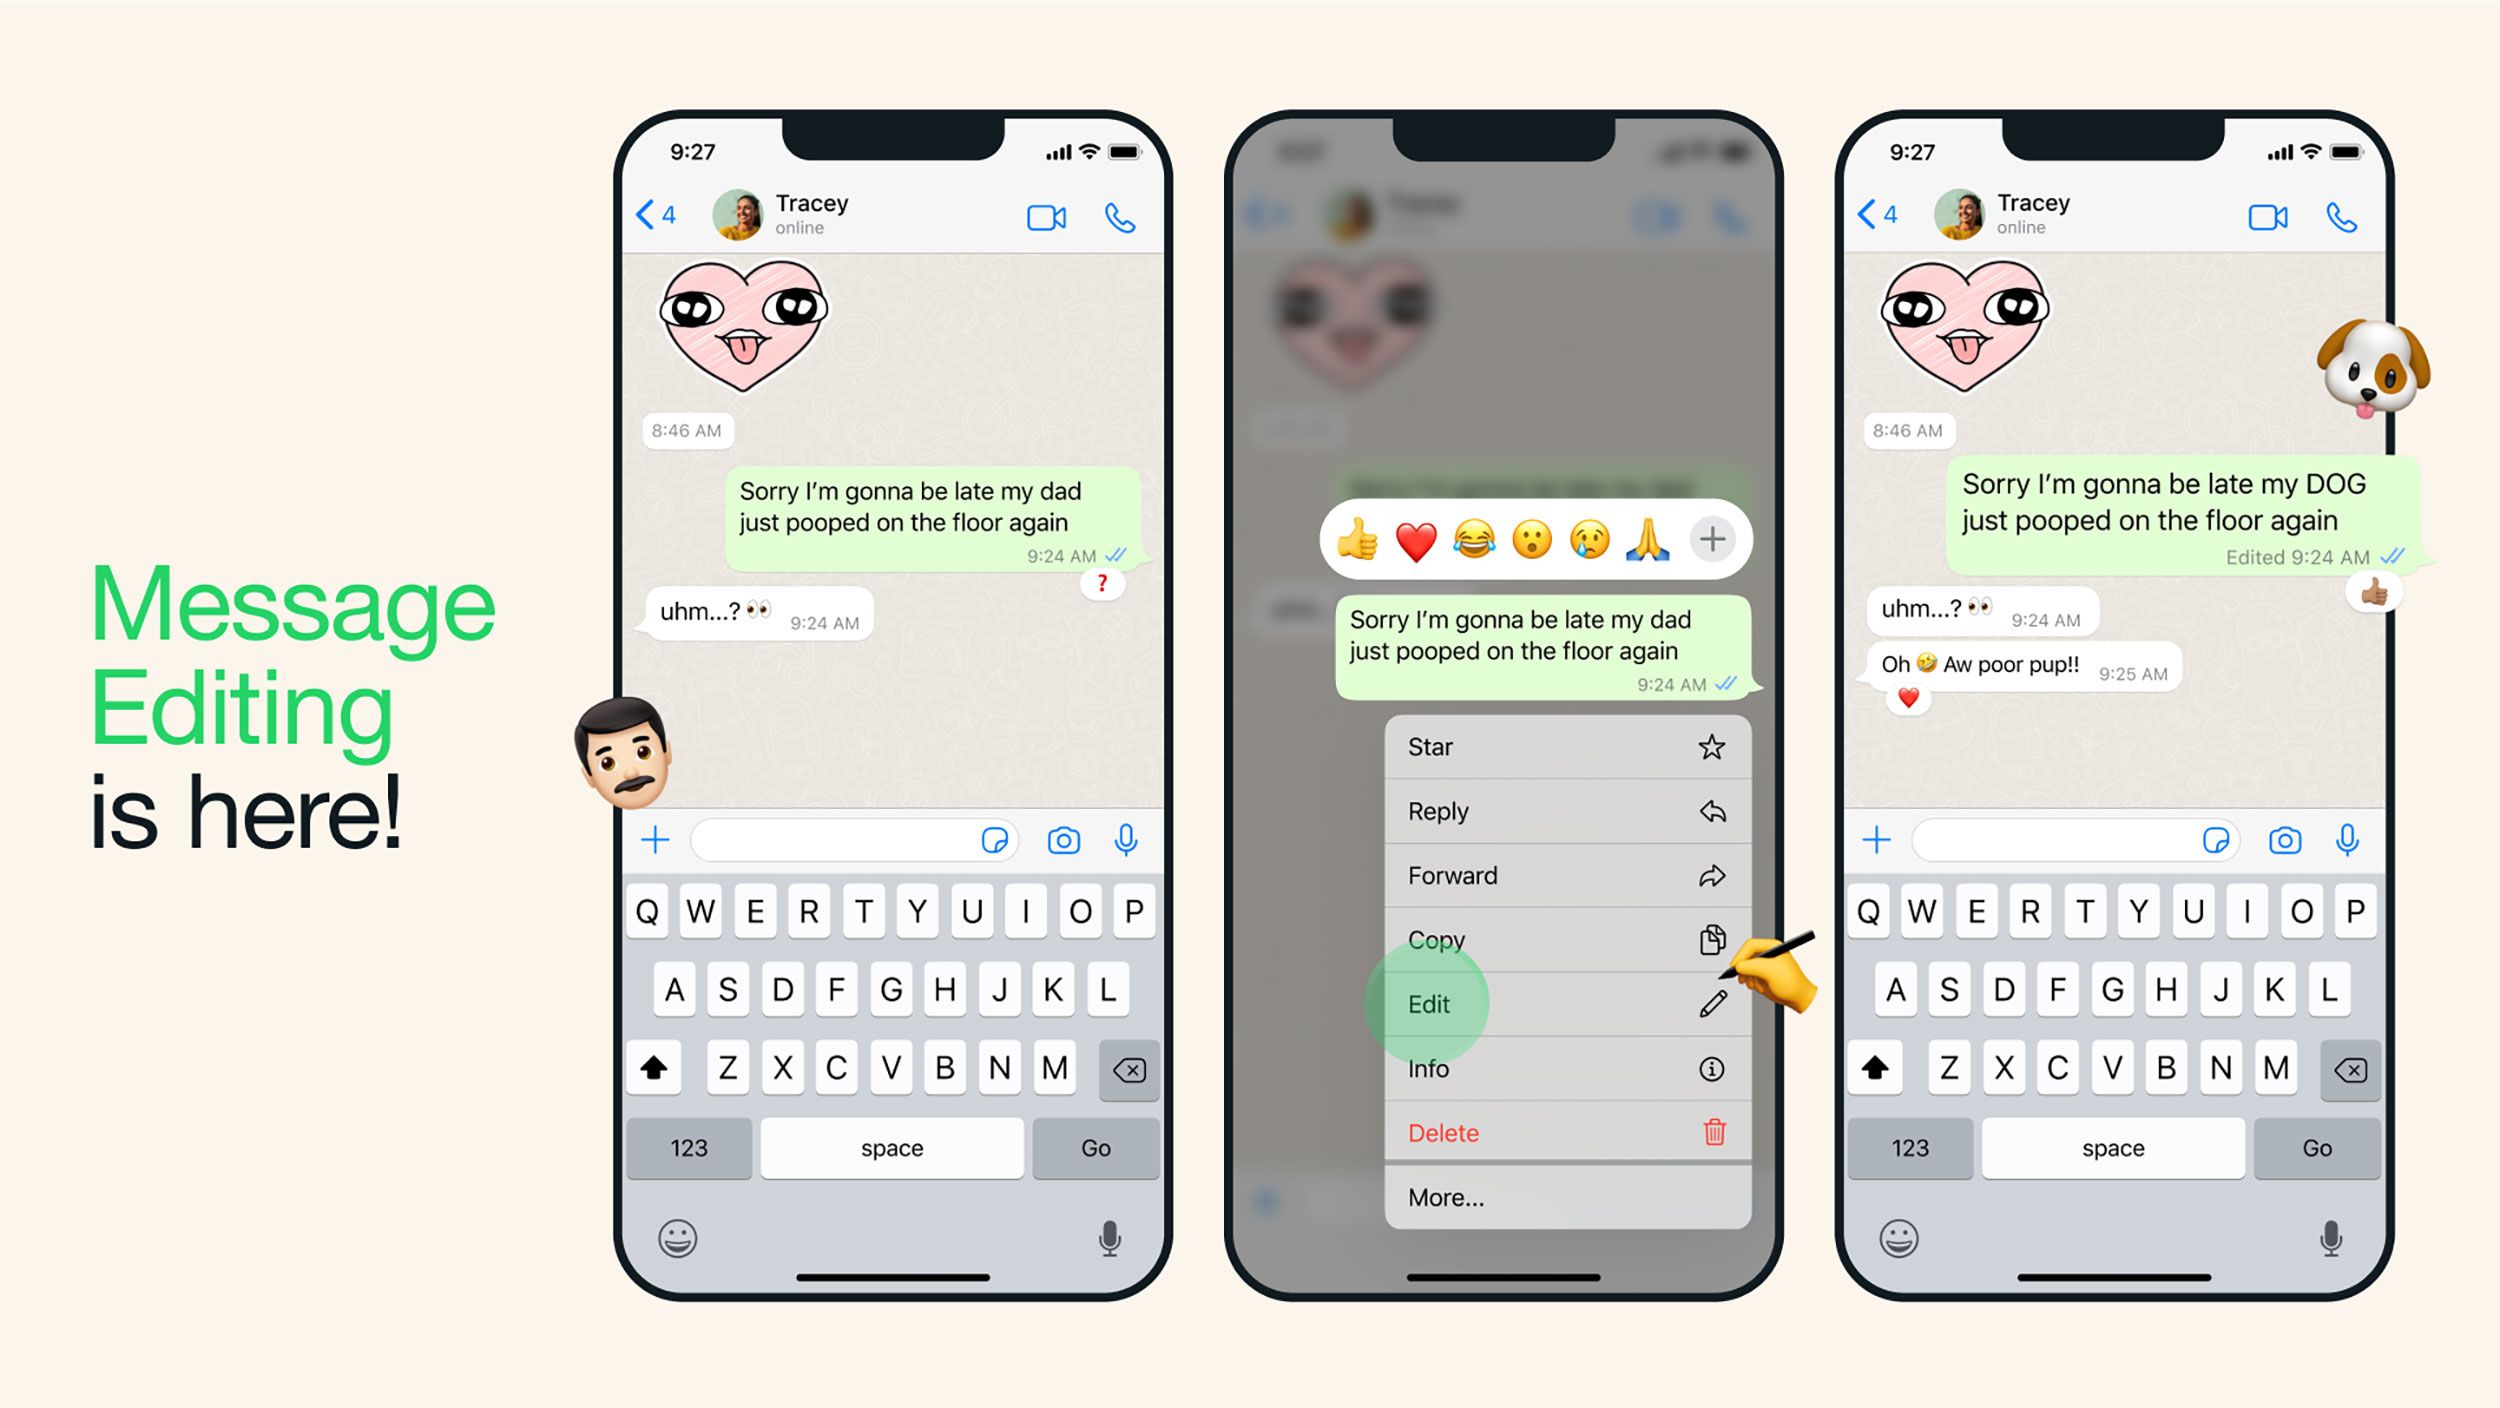 WhatsApp will now let you edit messages. But there's a catch